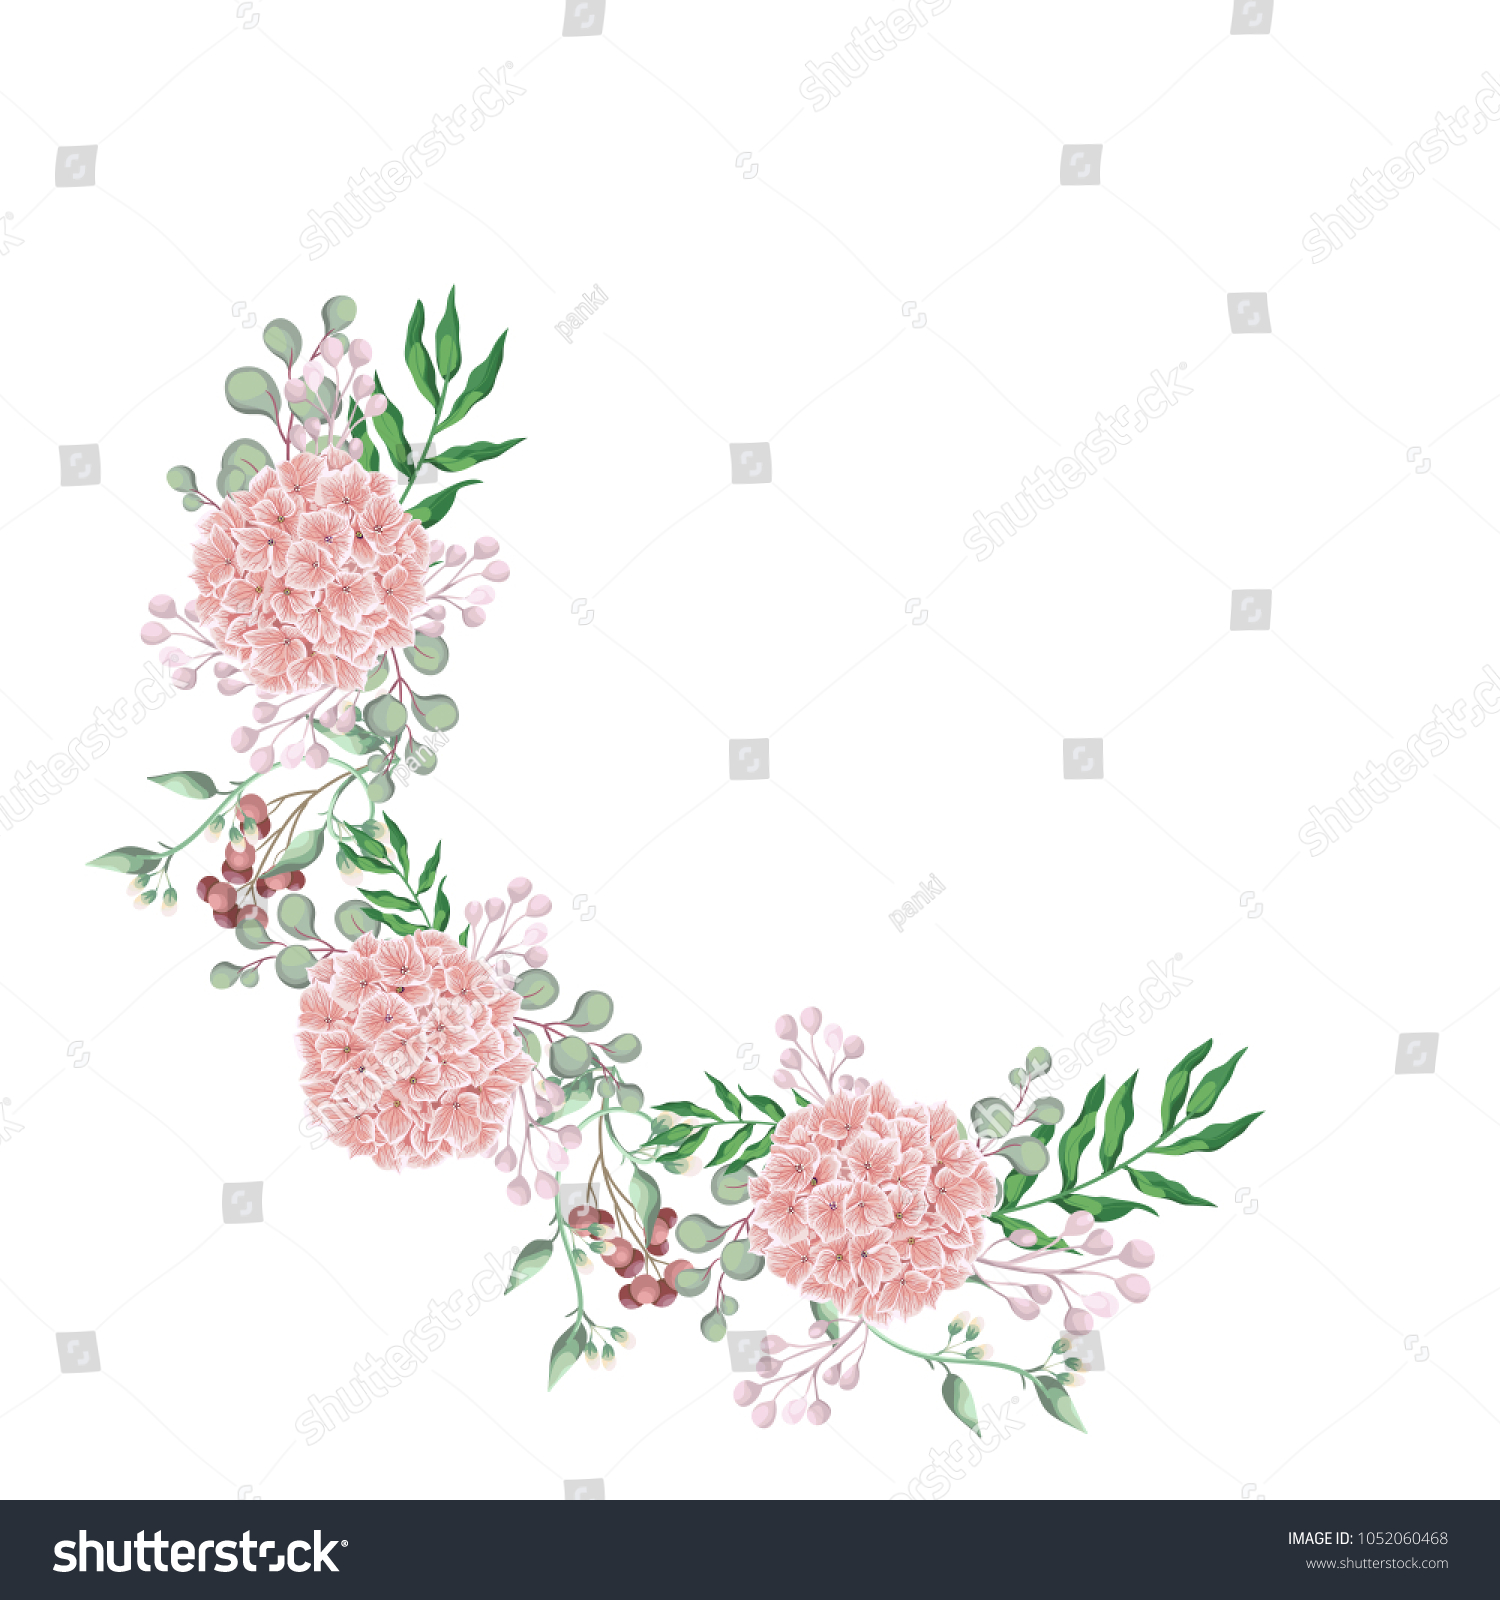 SVG of Pink hydrangea flower half wreath, floral border with eucalyptus, dry flowers, spring berry branch, leaves. Wedding watercolor invite card, romantic design. Boho vector in rustic elegant style. svg